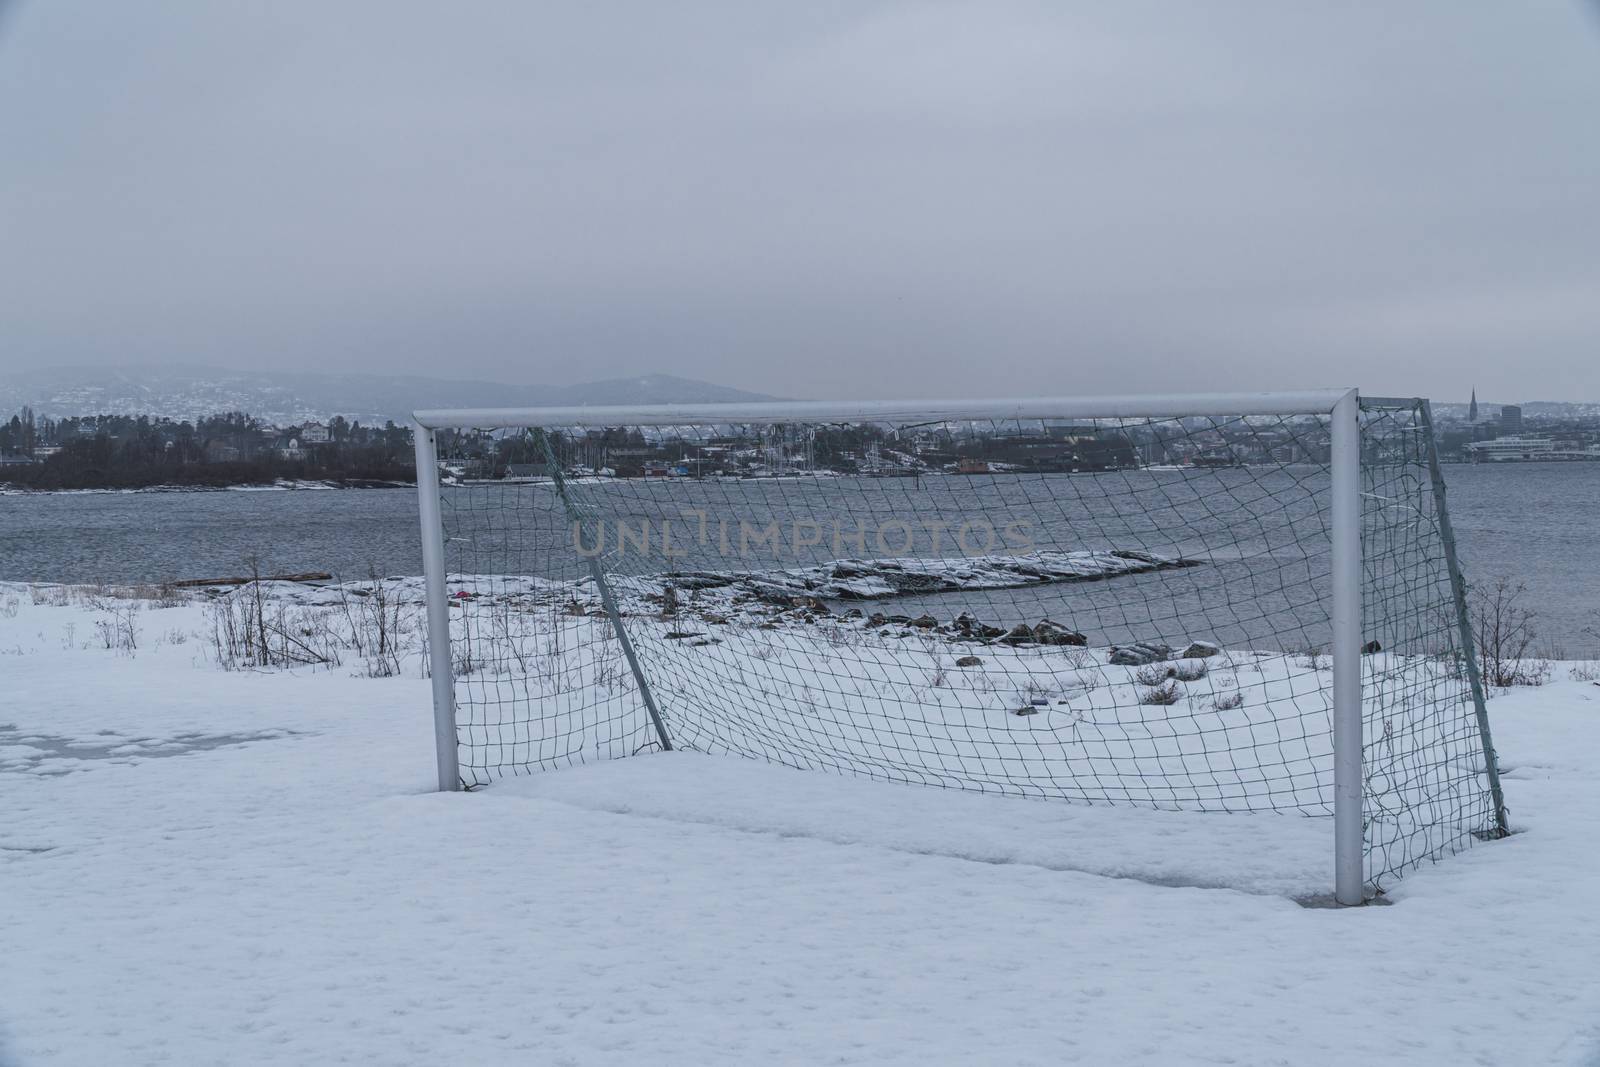 Old soccer goal in a snowy field close to a river in a fjord in Oslo, Norway